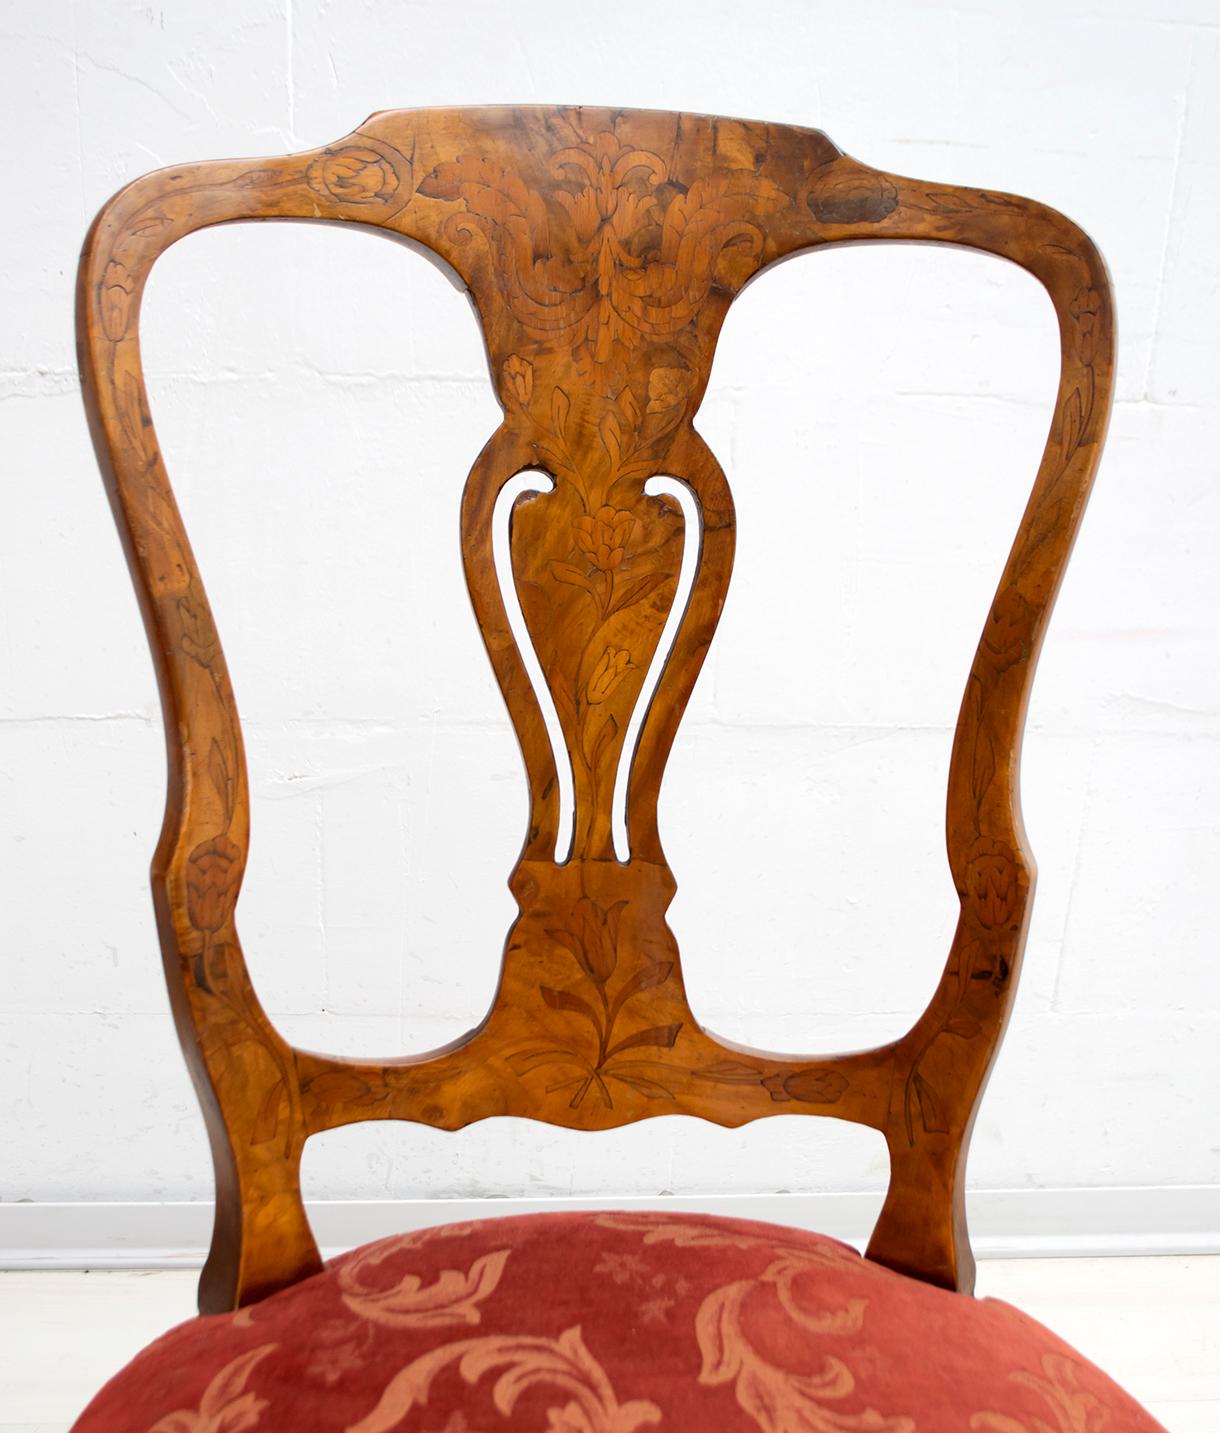 Walnut Dutch Chairs of the 20th Century with Maple Wood Inlays, Netherlands For Sale 1